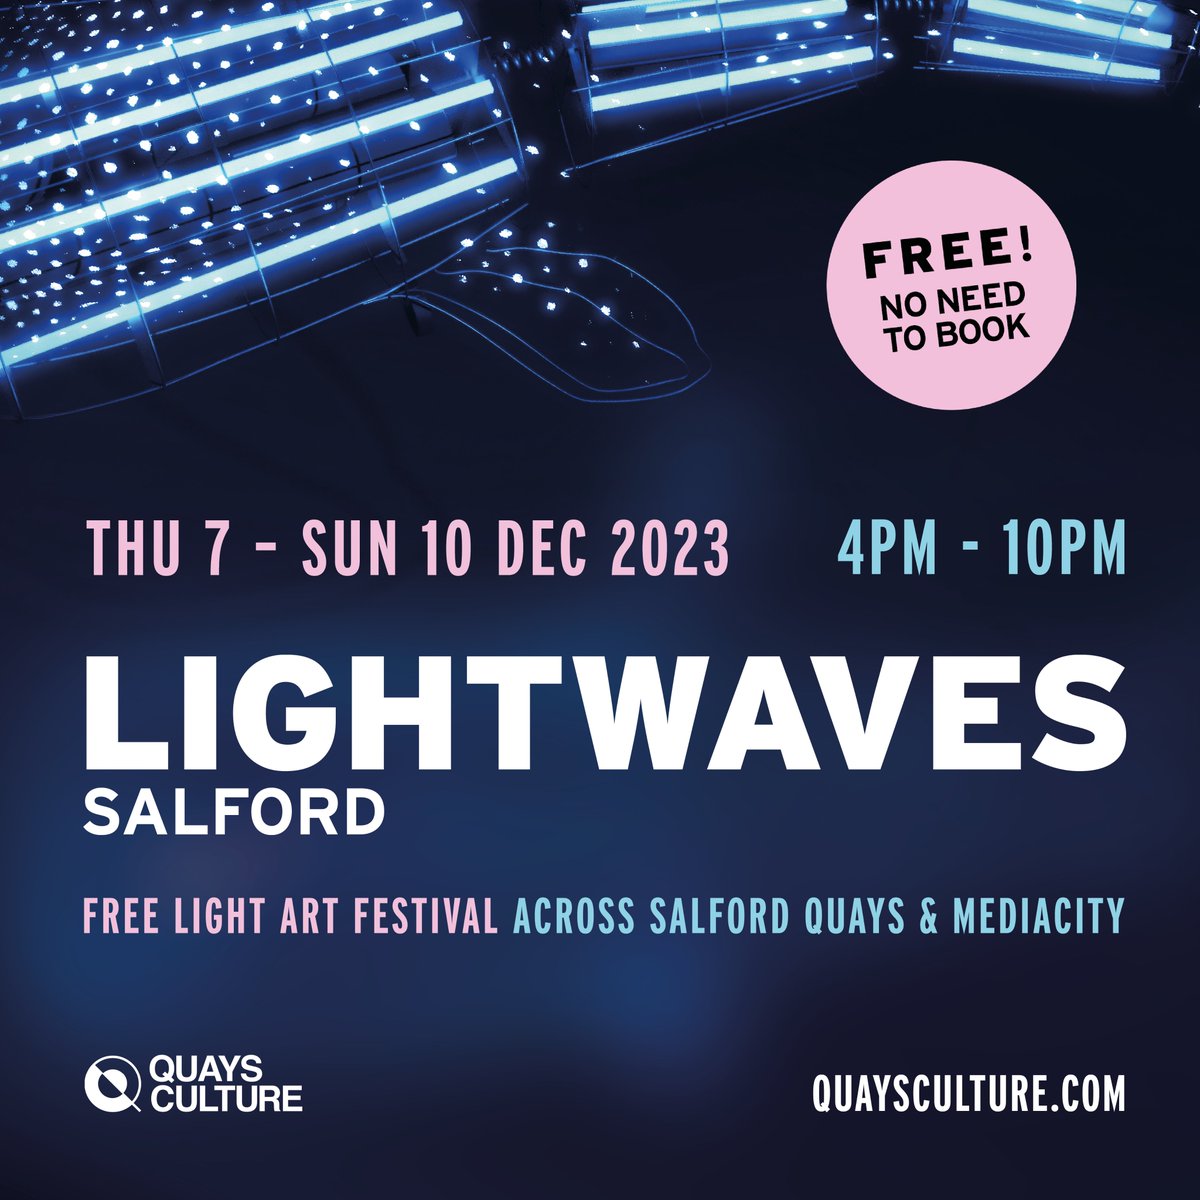 LIGHTWAVES IS BACK!  We’re excited to announce that Lightwaves Salford will be celebrating its 10th anniversary this winter. Lightwaves Salford runs over 4 evenings from 7th to 10th December 2023, 4pm-10pm. FREE to attend and no booking required, just turn up and enjoy!